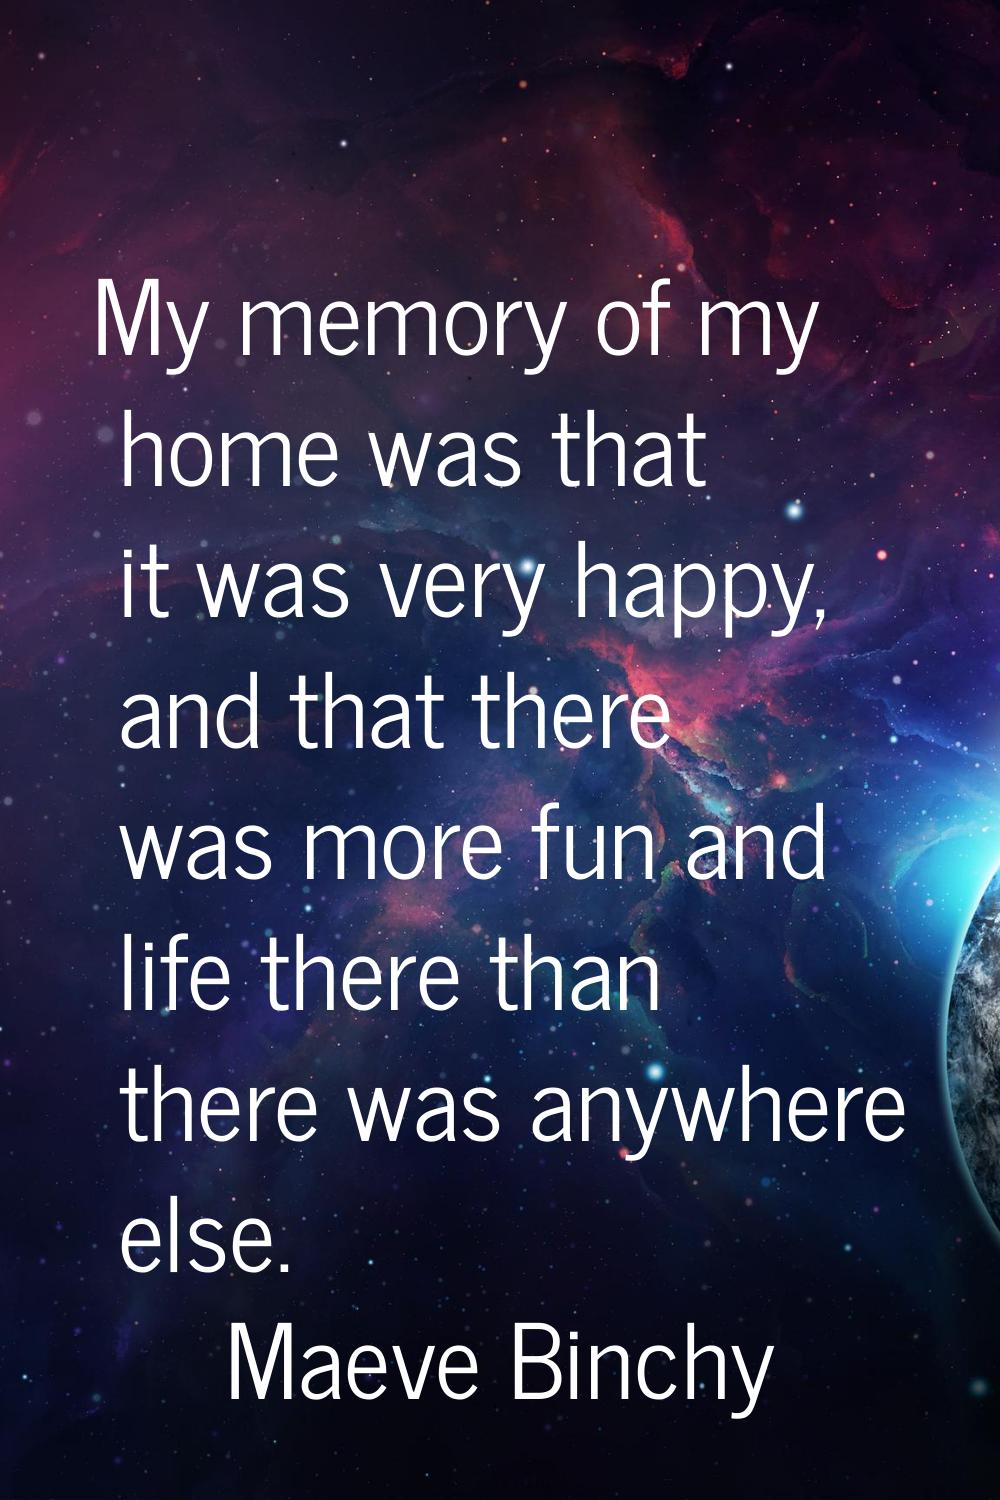 My memory of my home was that it was very happy, and that there was more fun and life there than th